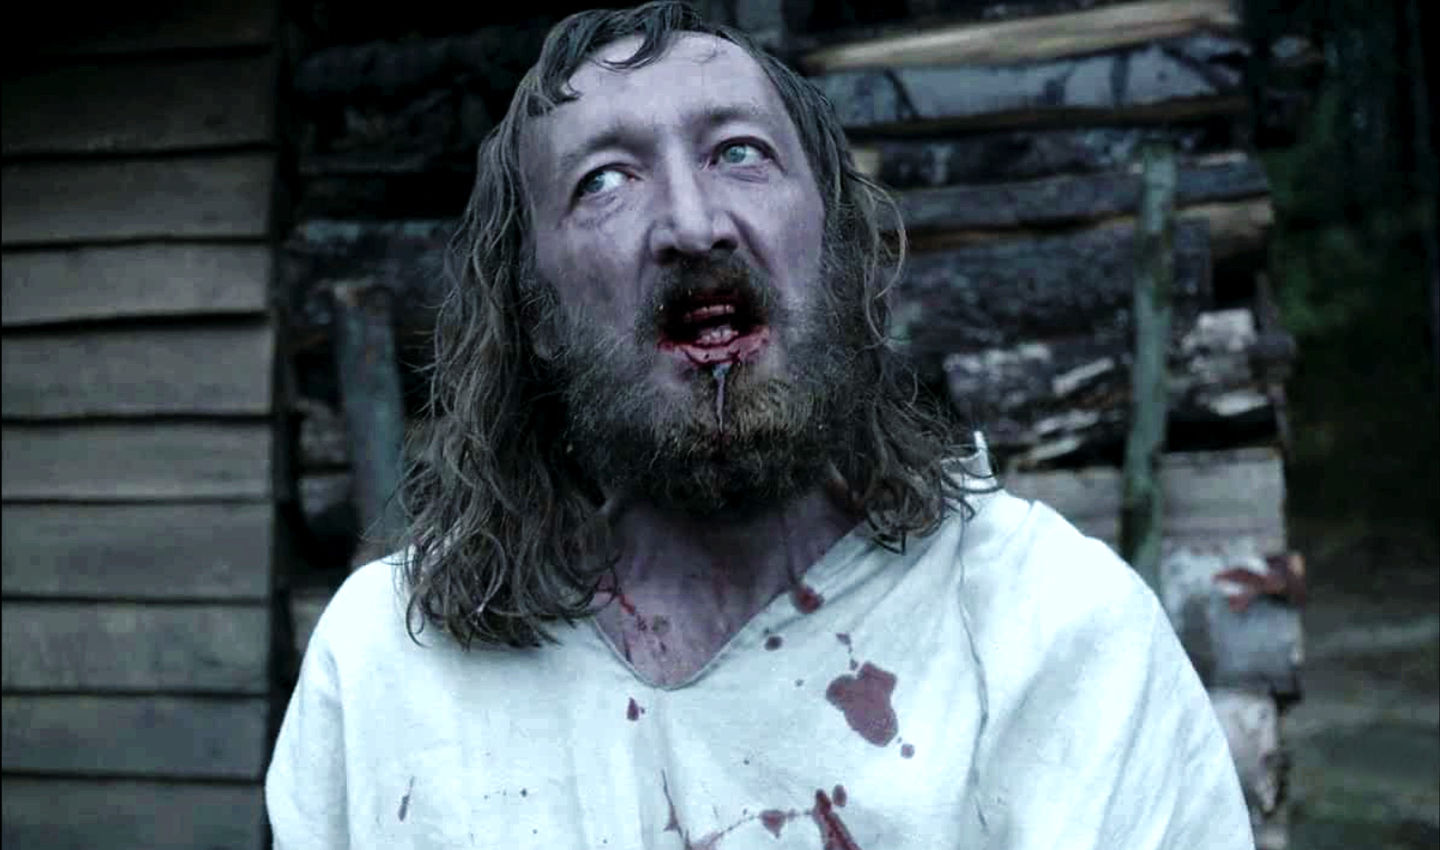 THE VVITCH - Ralph Ineson